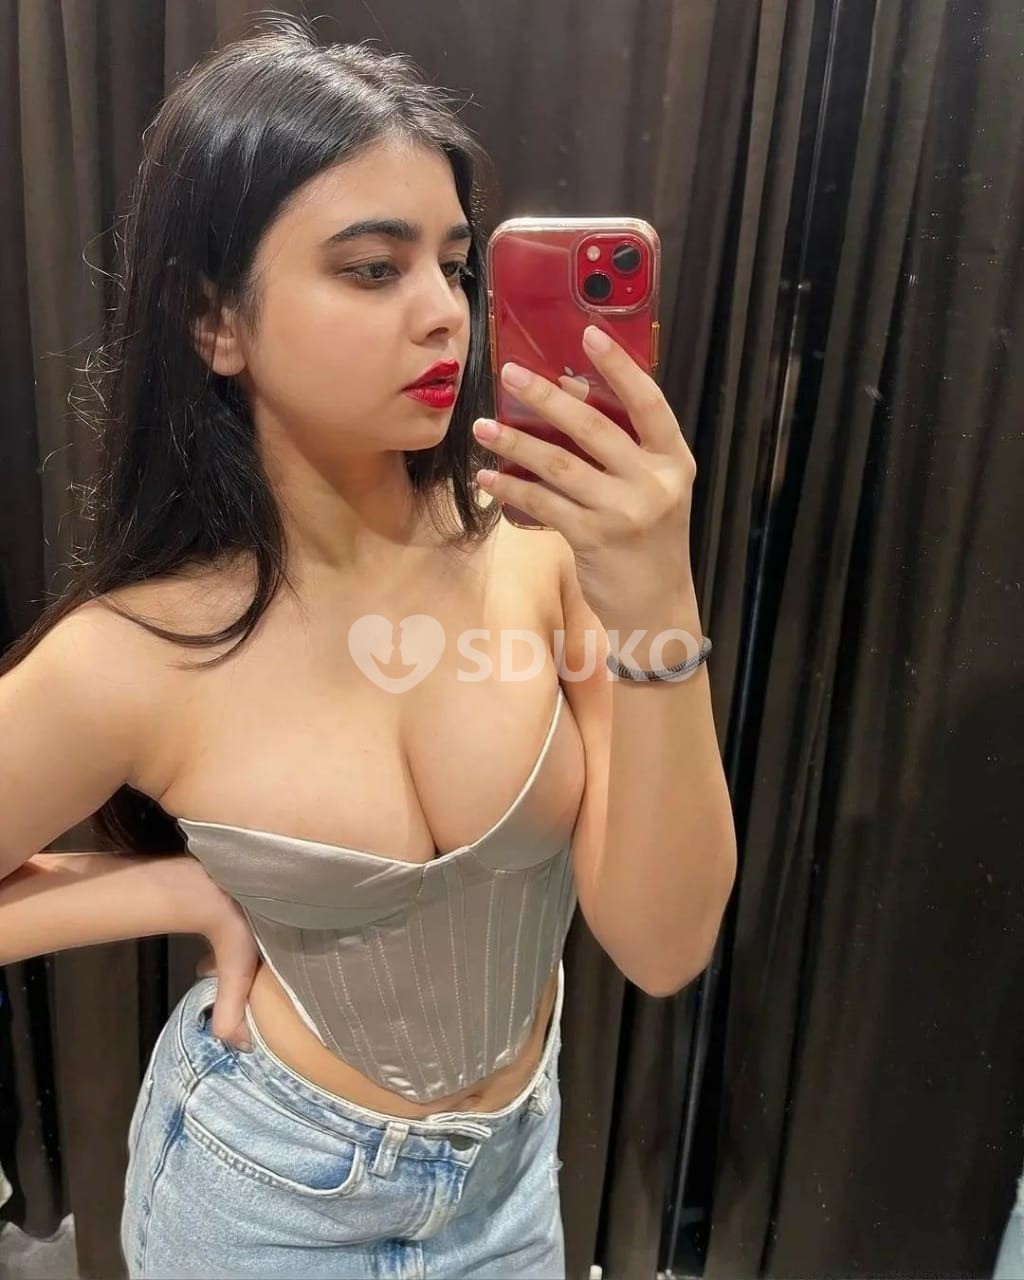 Hadapsar CALL ME DIVYA LOW PRICE UNLIMITED SHOOT 100% GENUINE SEXY VIP CALL GIRLS ARE PROVIDED SECURE SERVICES CALL 24 H